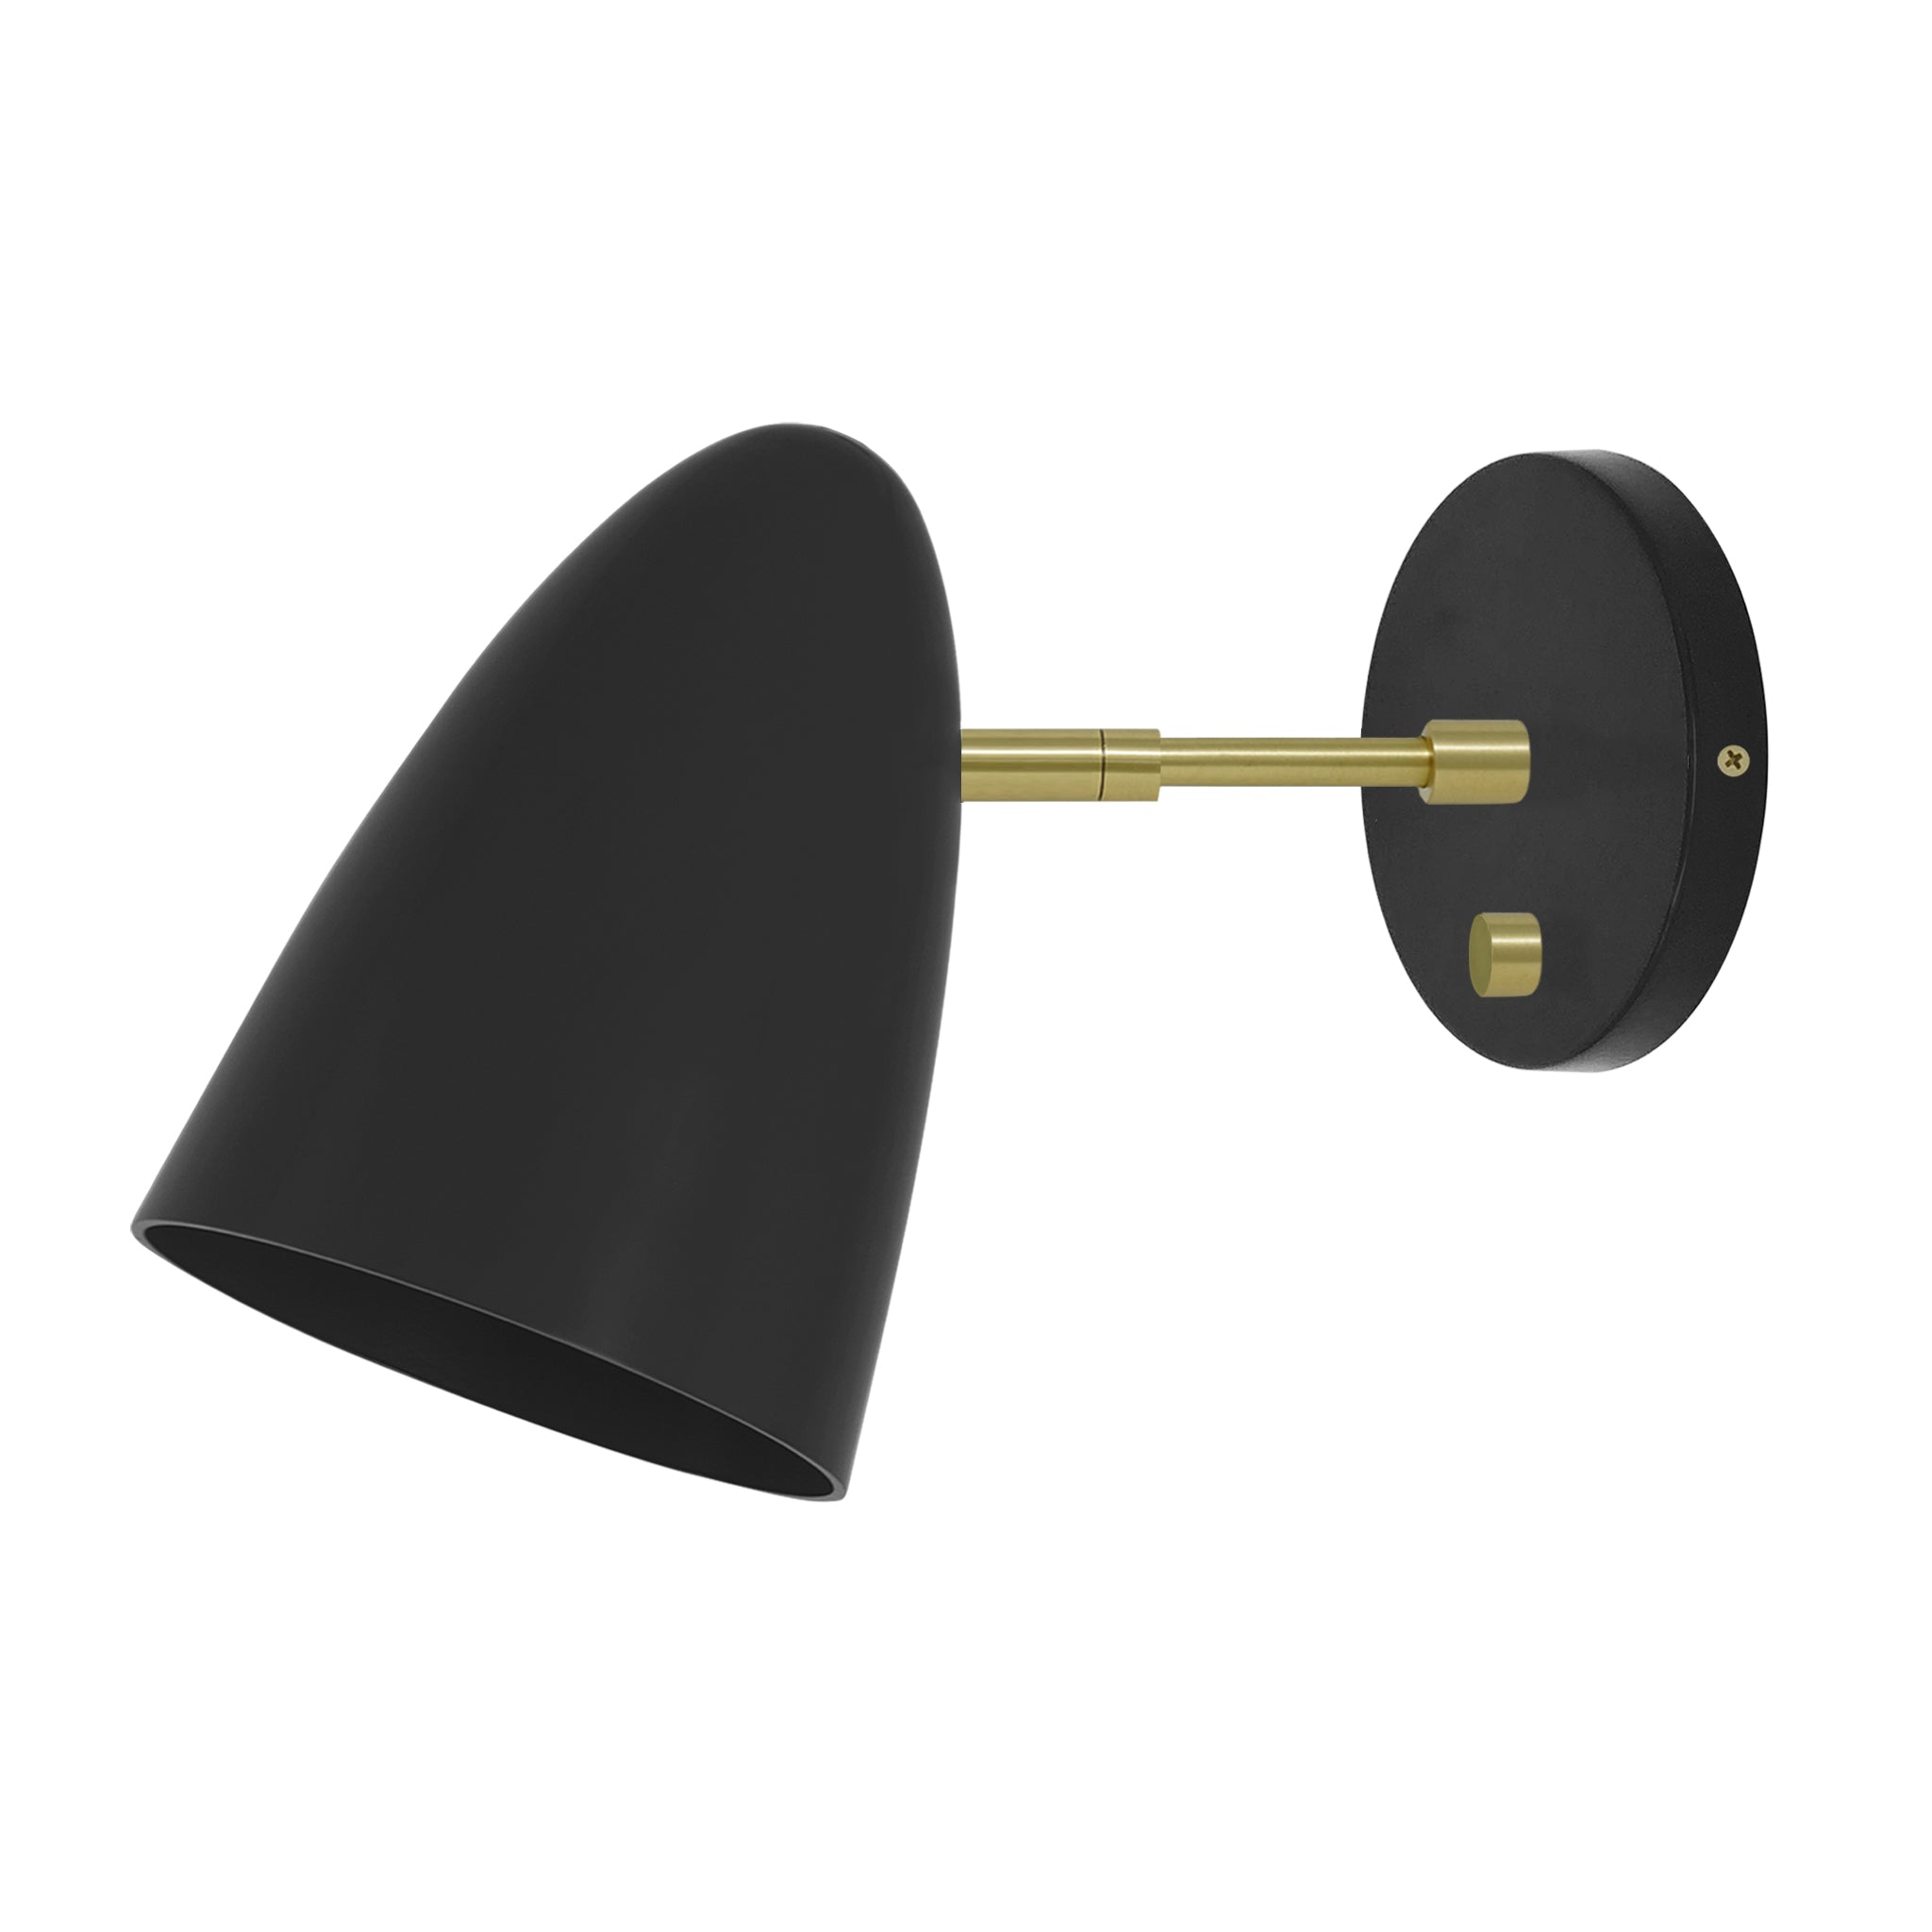 Brass and black color Boom sconce 3" arm Dutton Brown lighting